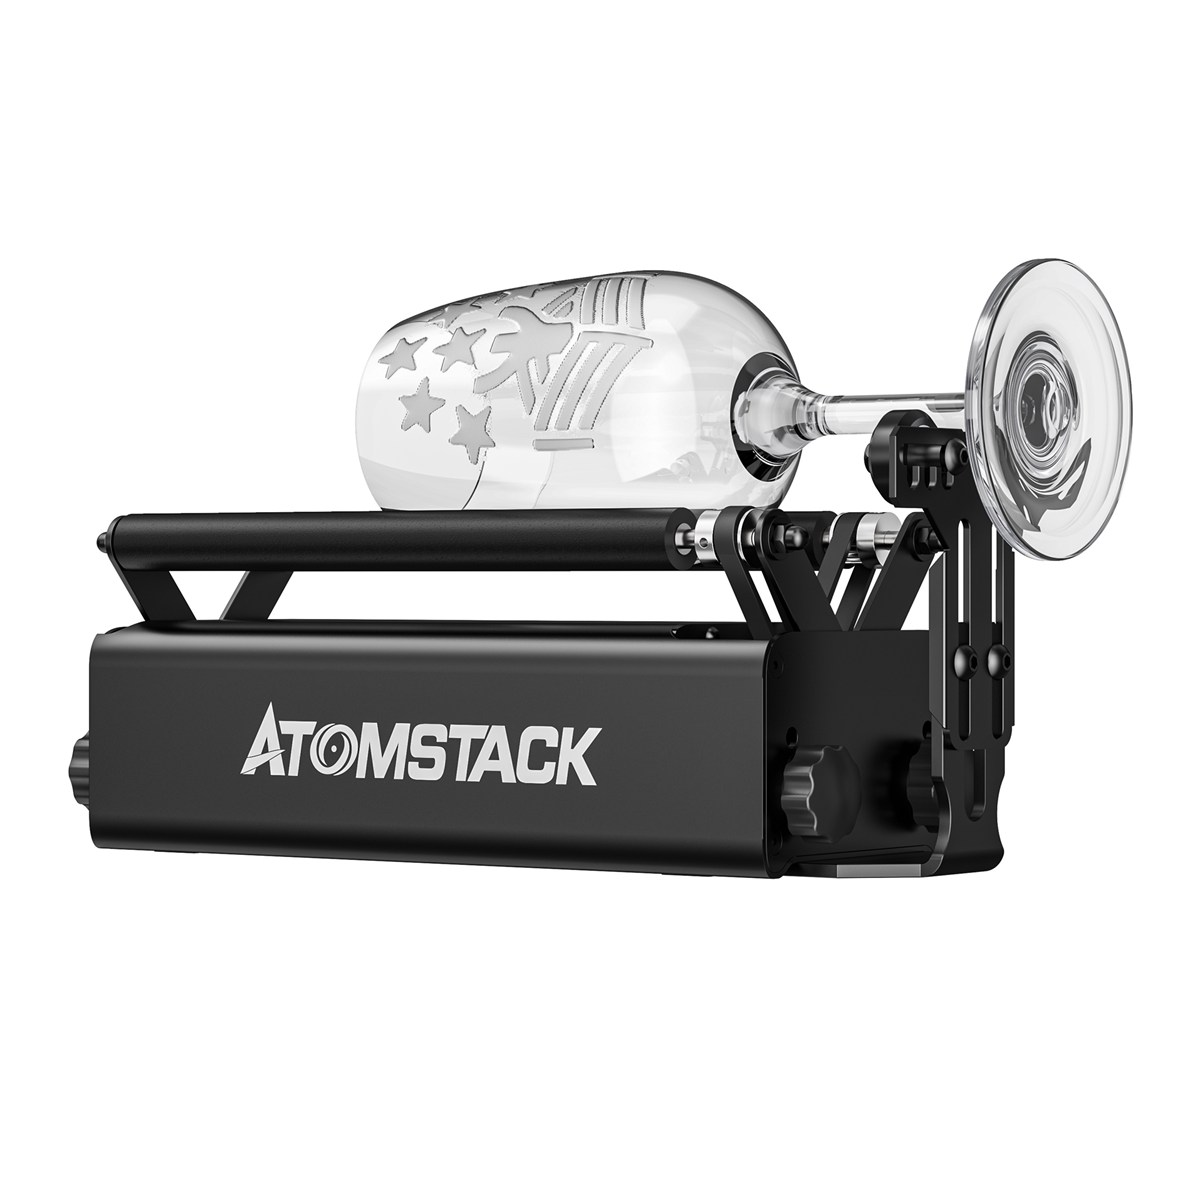 Atomstack Upgraded R3 Pro Rotary Roller with Separable support module and Extension Towers